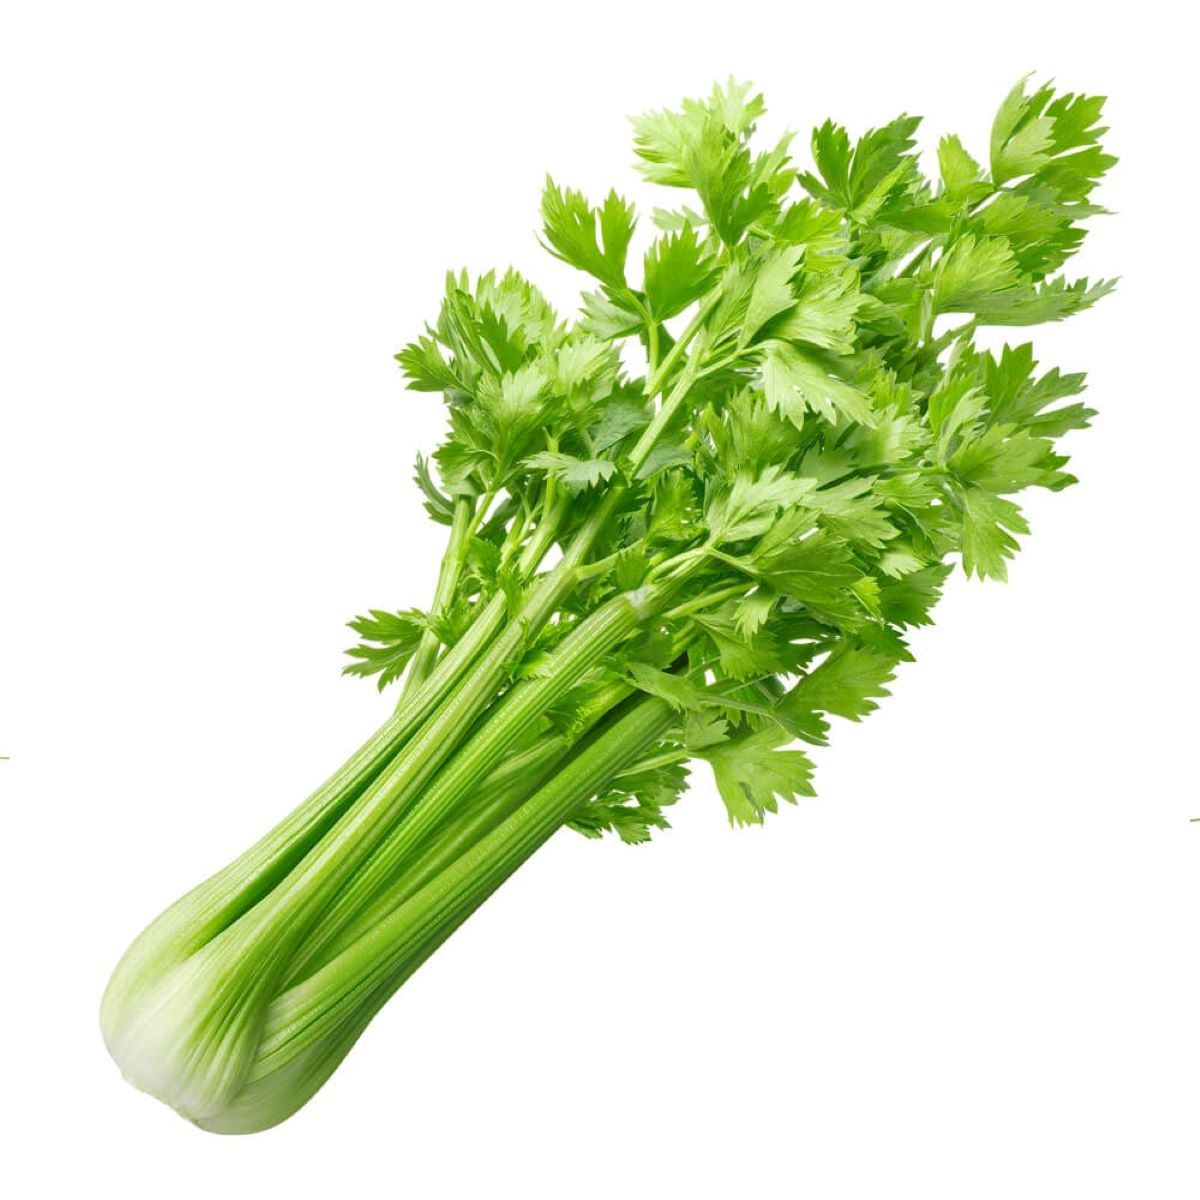 How To Store Fresh Celery